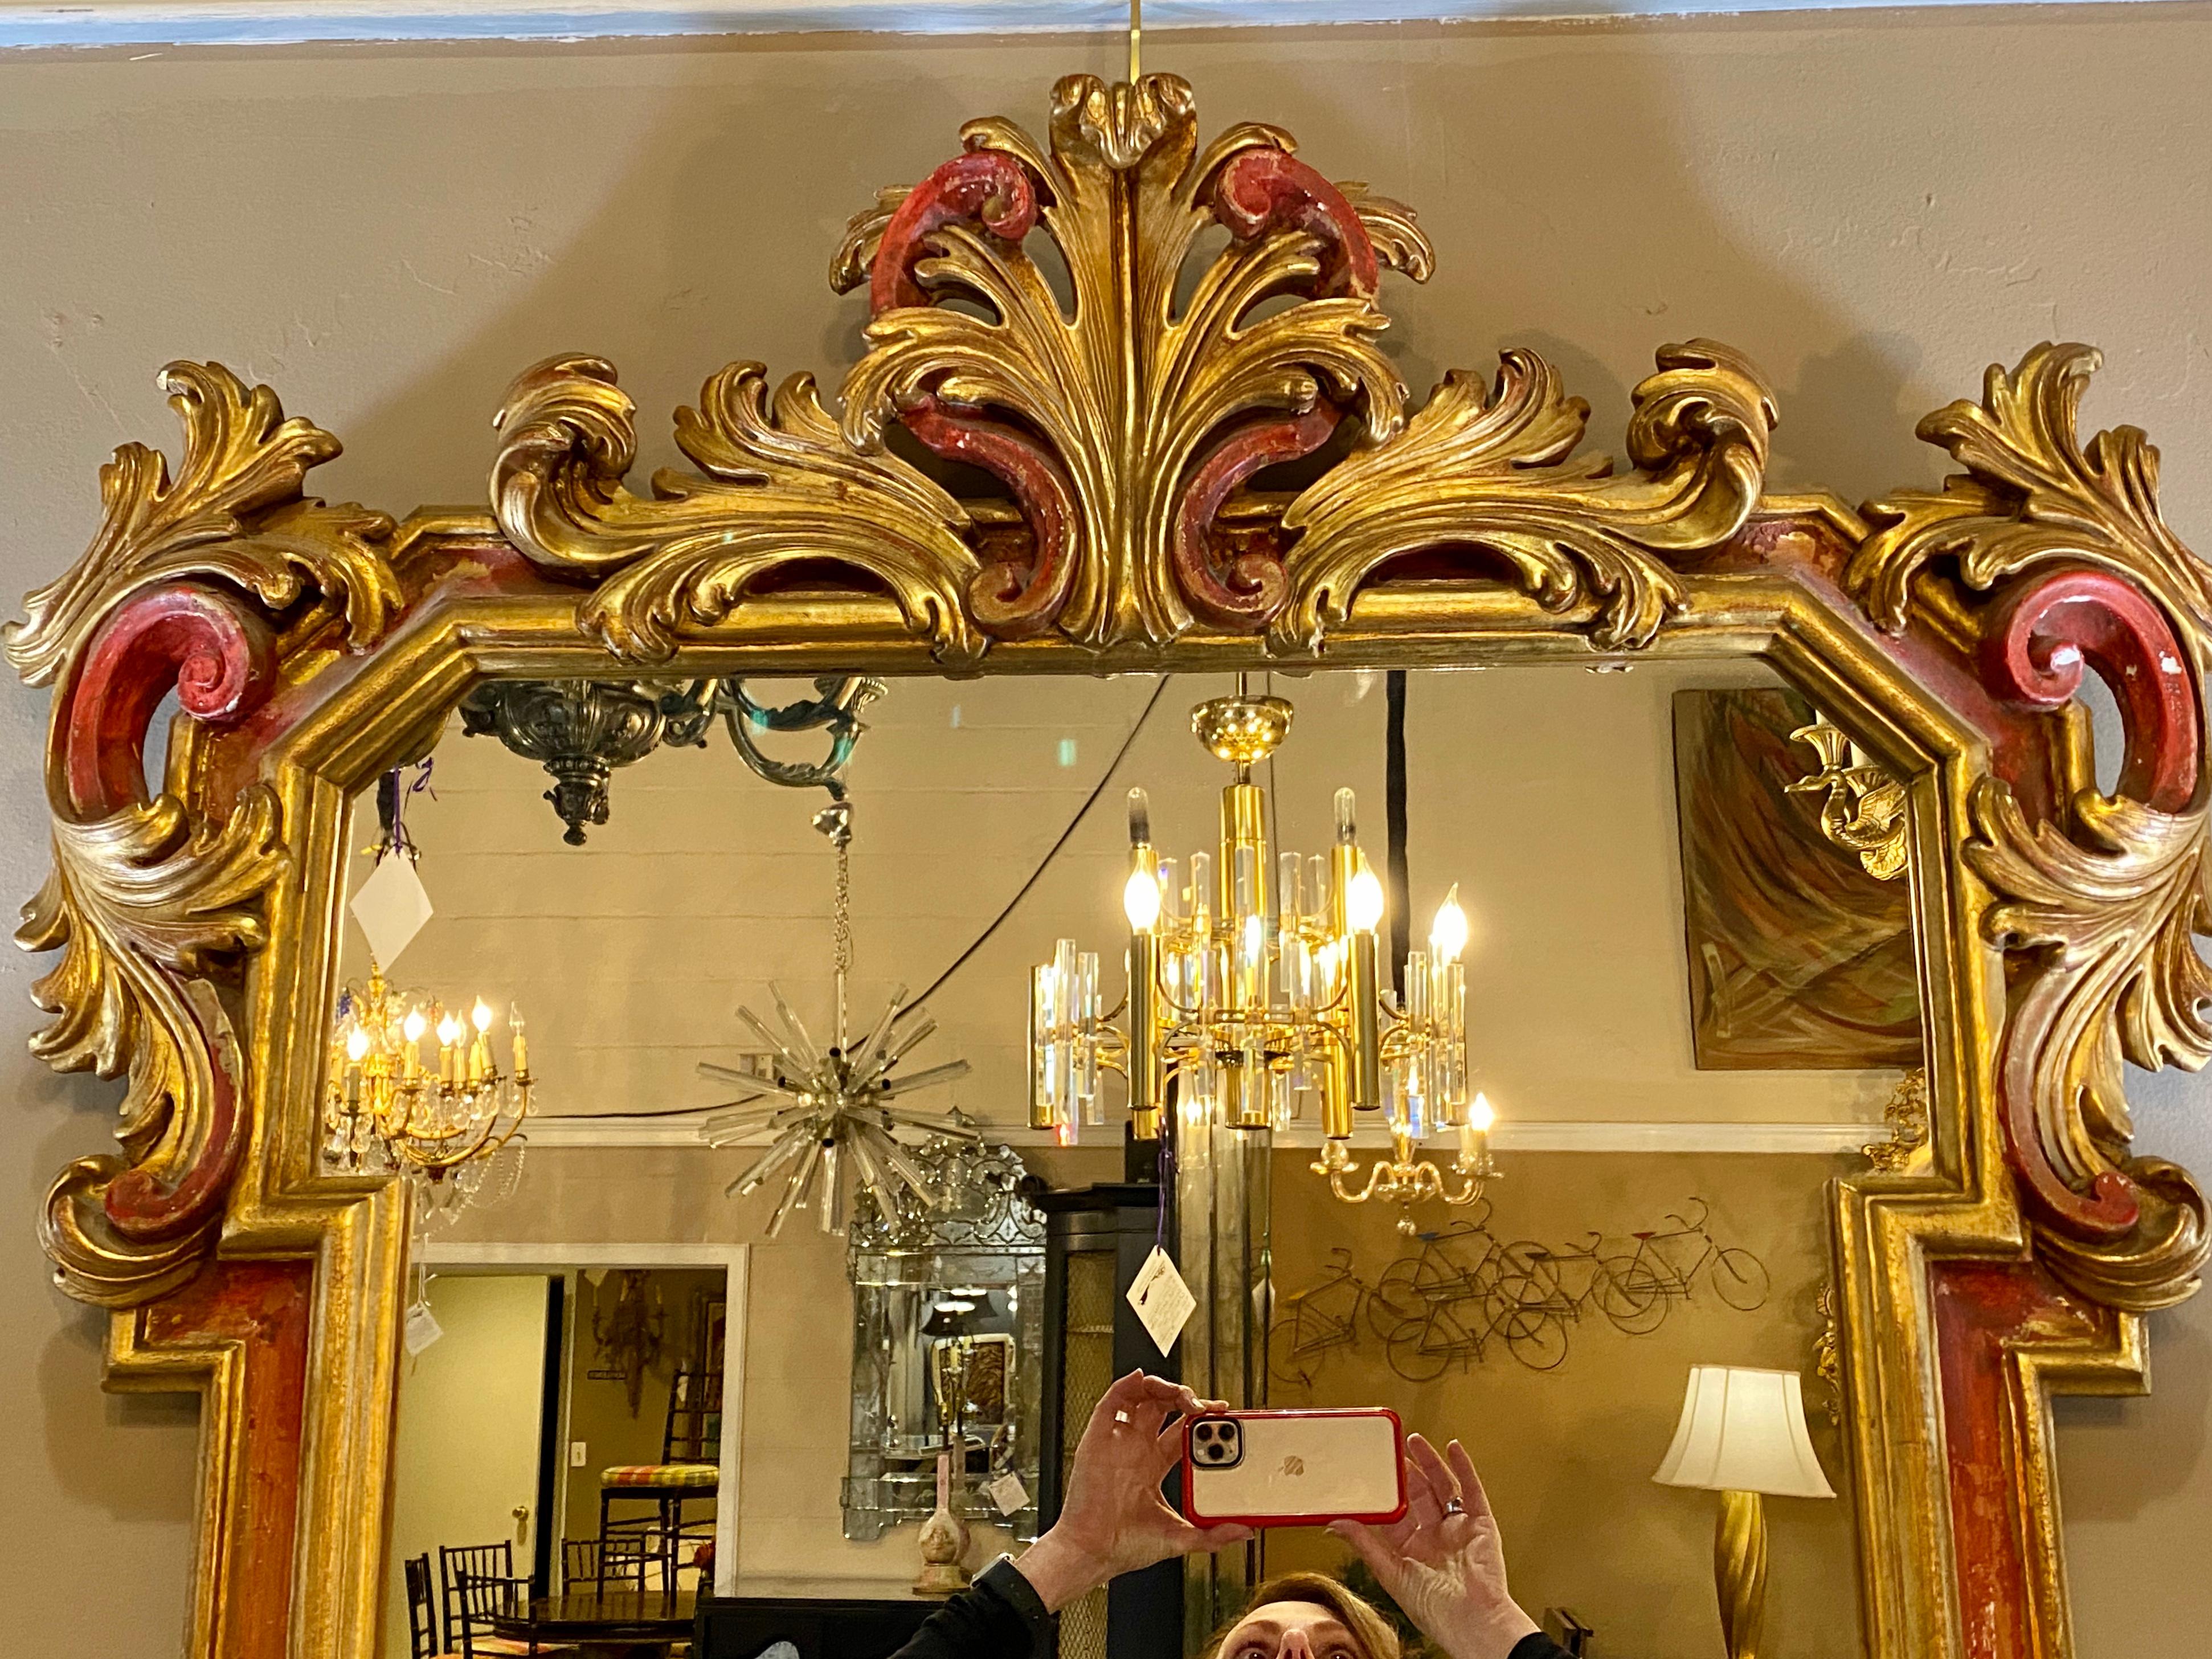 A very fine wooden mirror with red paint decorated undertones on gold gilt hi lights. Nice geometric frame with a gilt floral leaf design border.